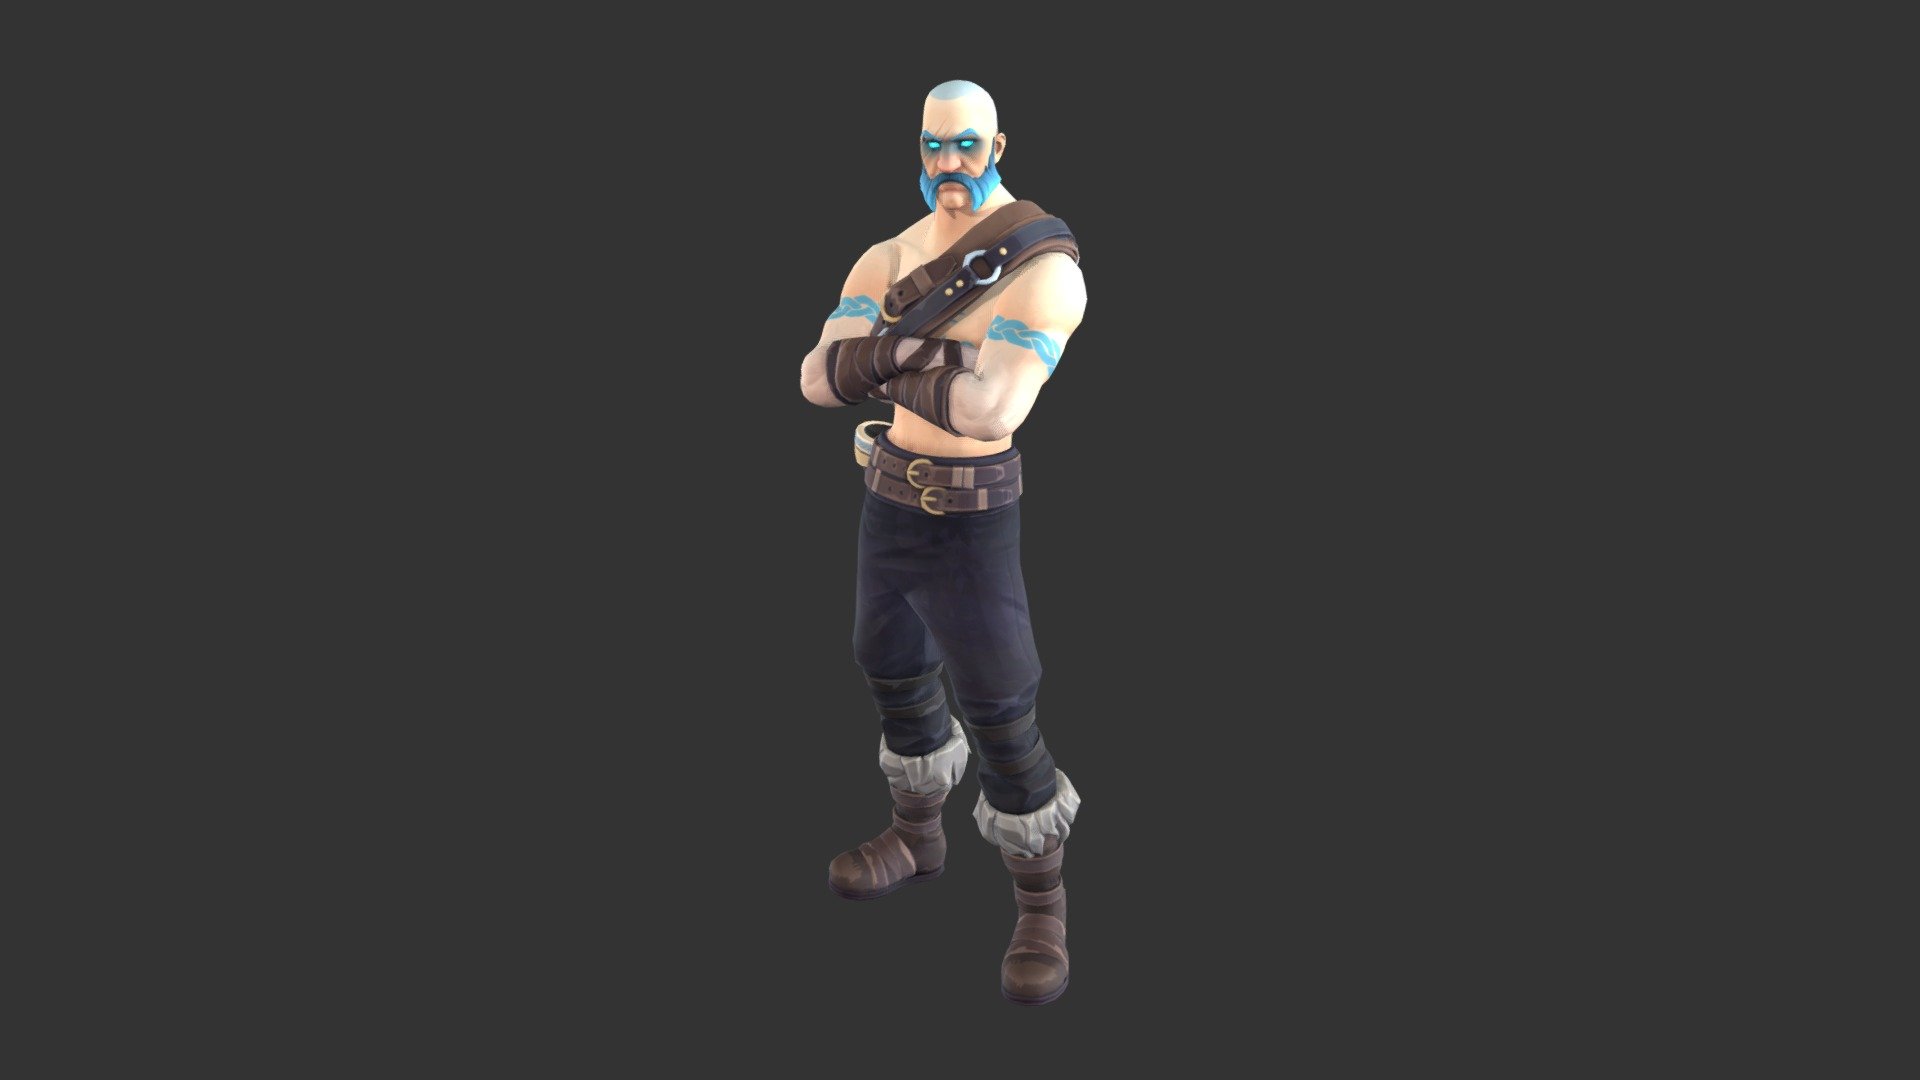 Fortnite Battle Royale Ragnarok Outfit (Tier #1) Outfit Skin - 3D Model Preview

More info: https://fortniteskins.net/outfits/ragnarok/ - Ragnarok Outfit (Tier #1) - 3D model by Fortnite Skins (@fortniteskins) 3d model